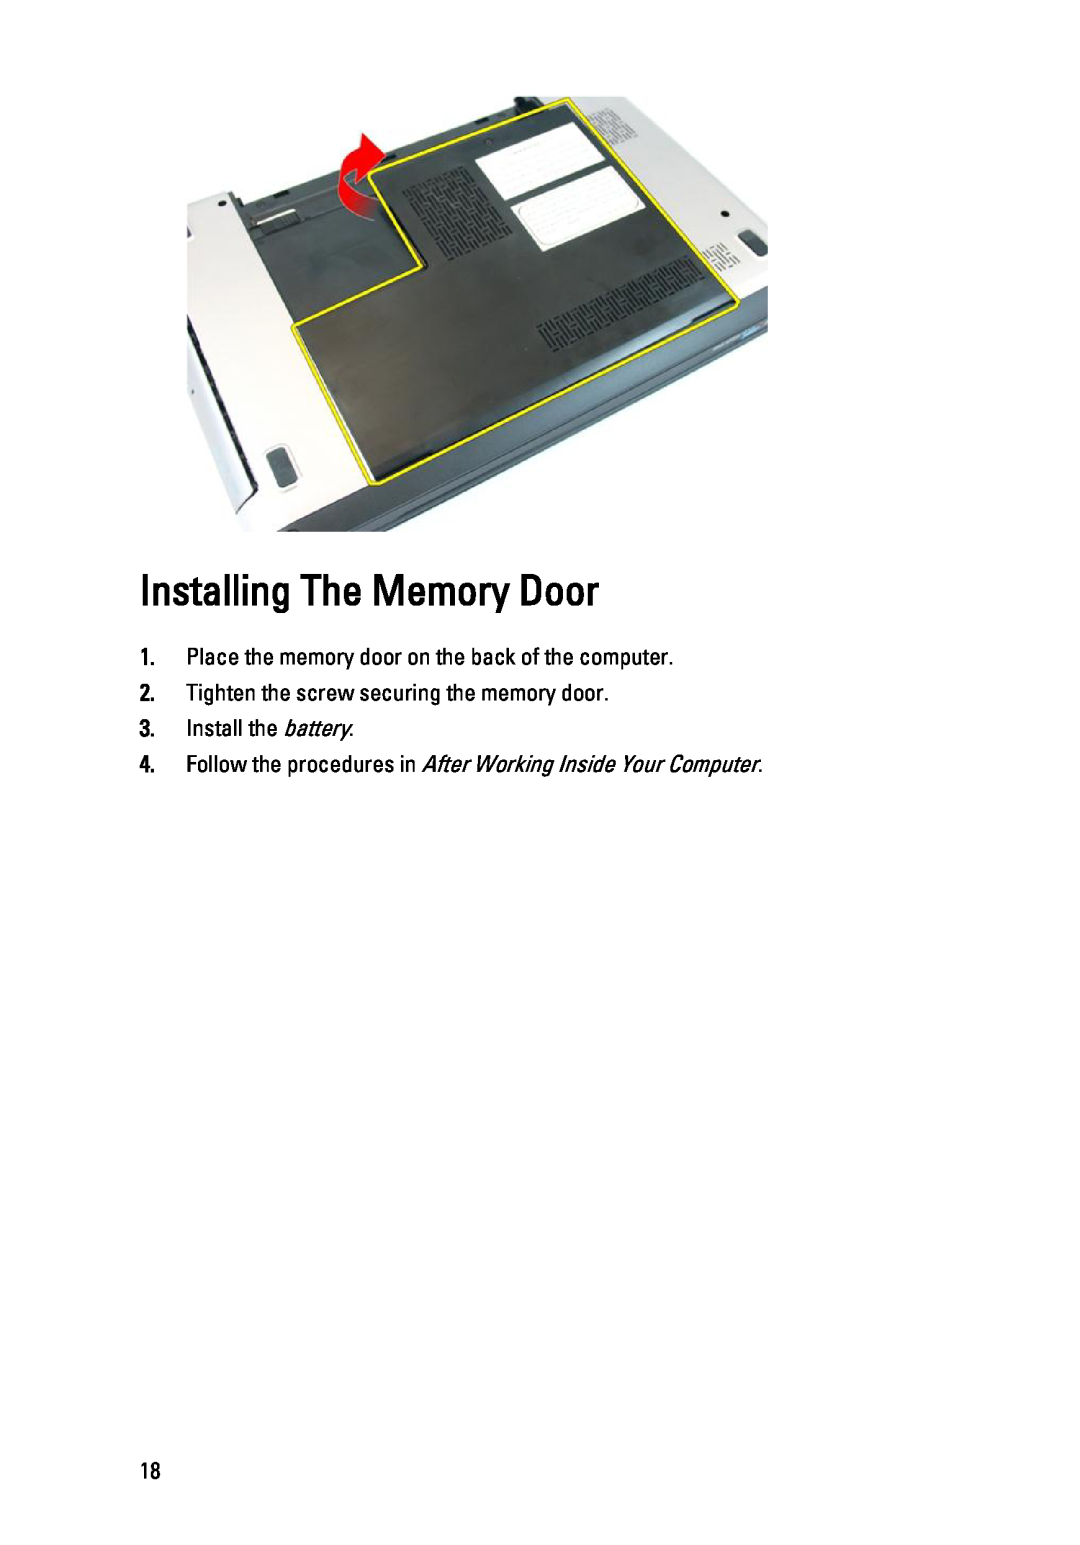 Dell 3450 owner manual Installing The Memory Door, Place the memory door on the back of the computer 